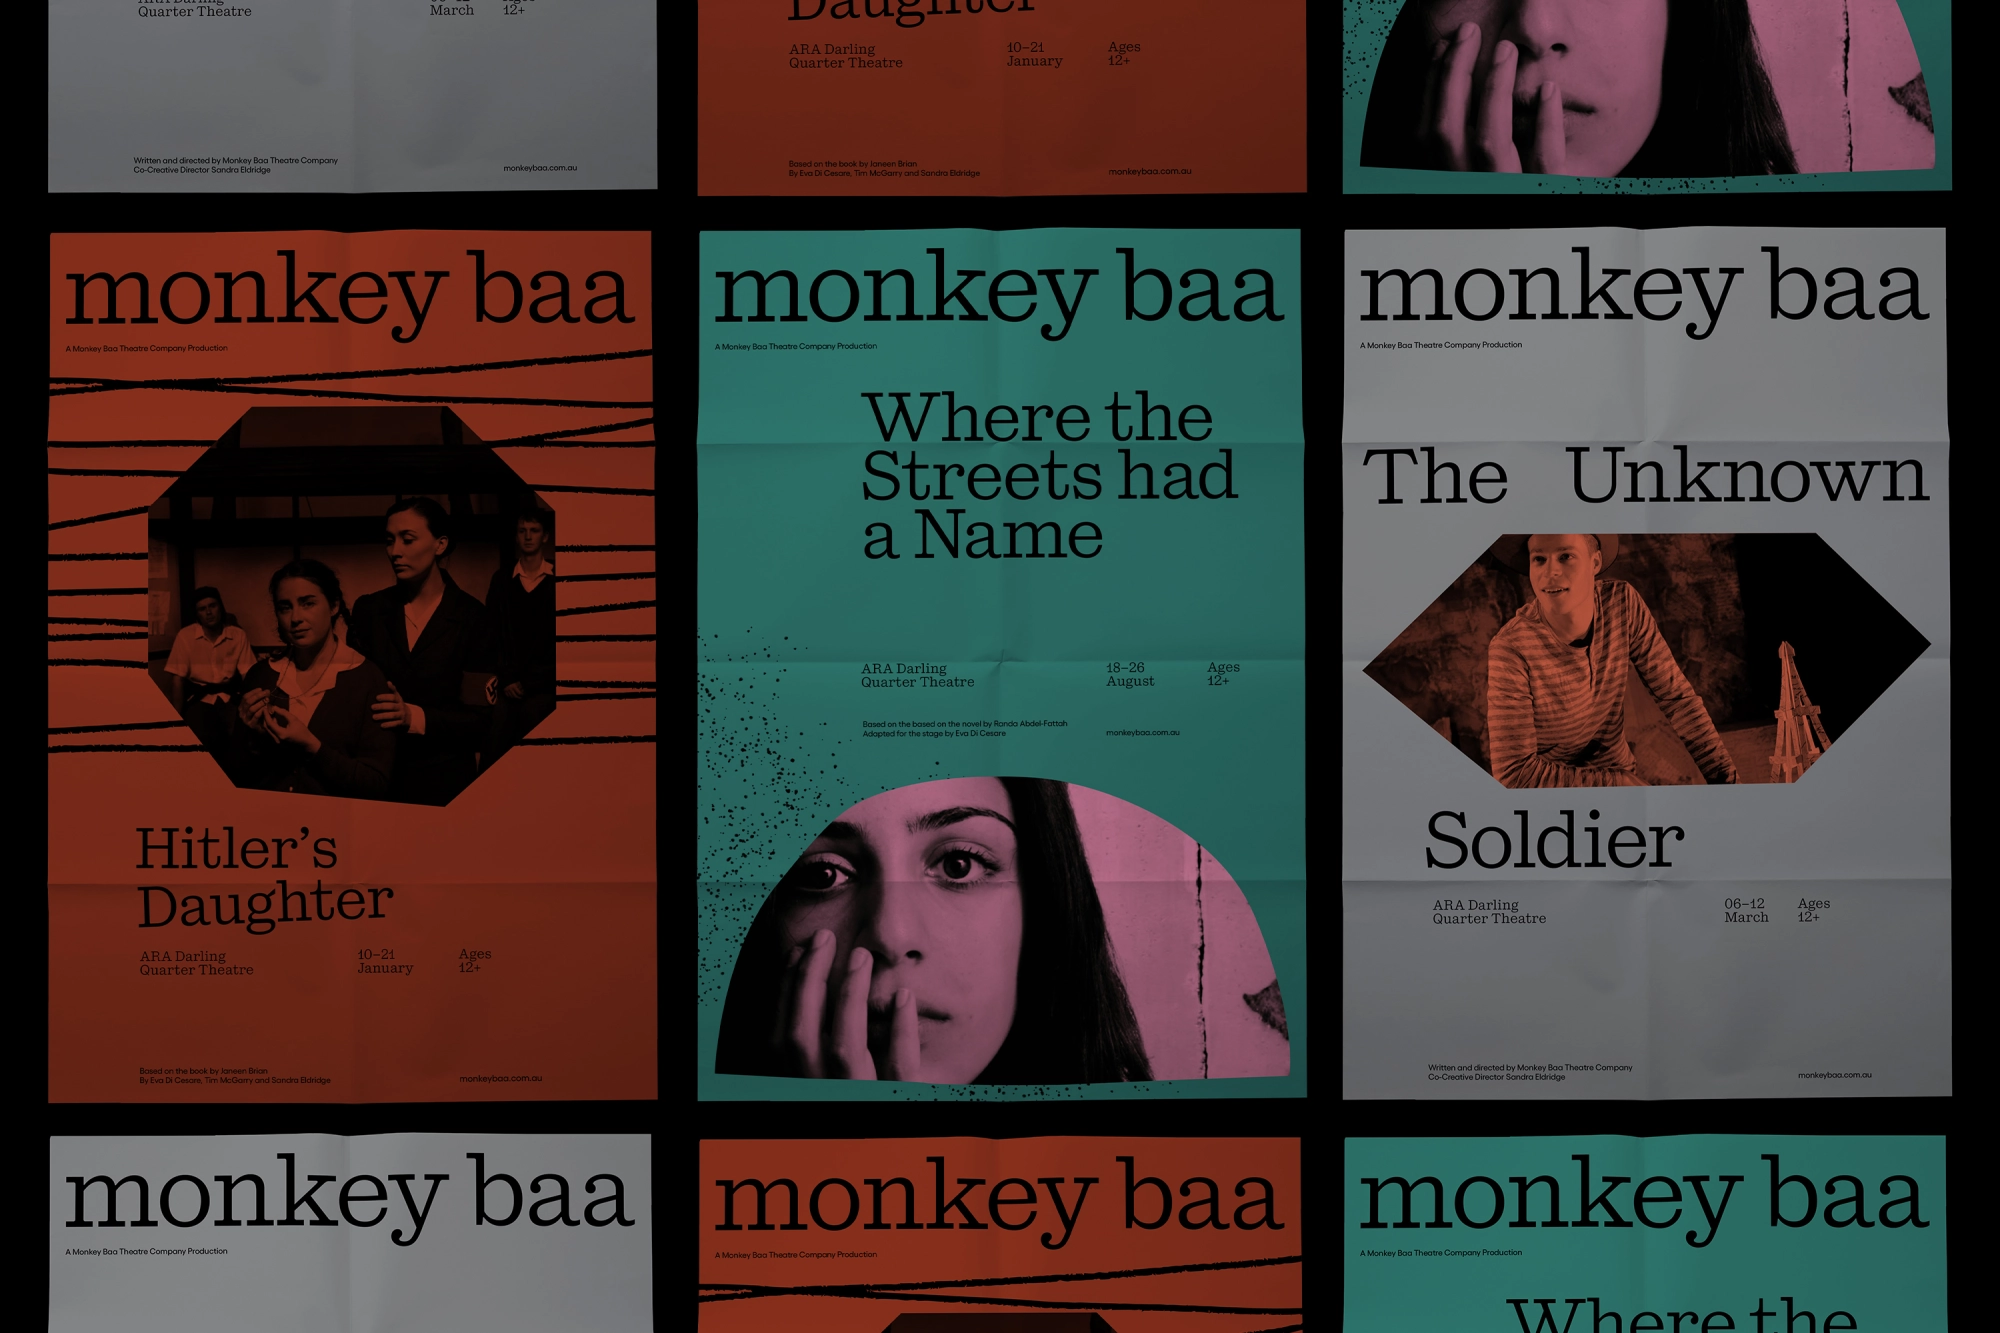 Poster design by Universal Favourite for Sydney-based Monkey Baa Theatre